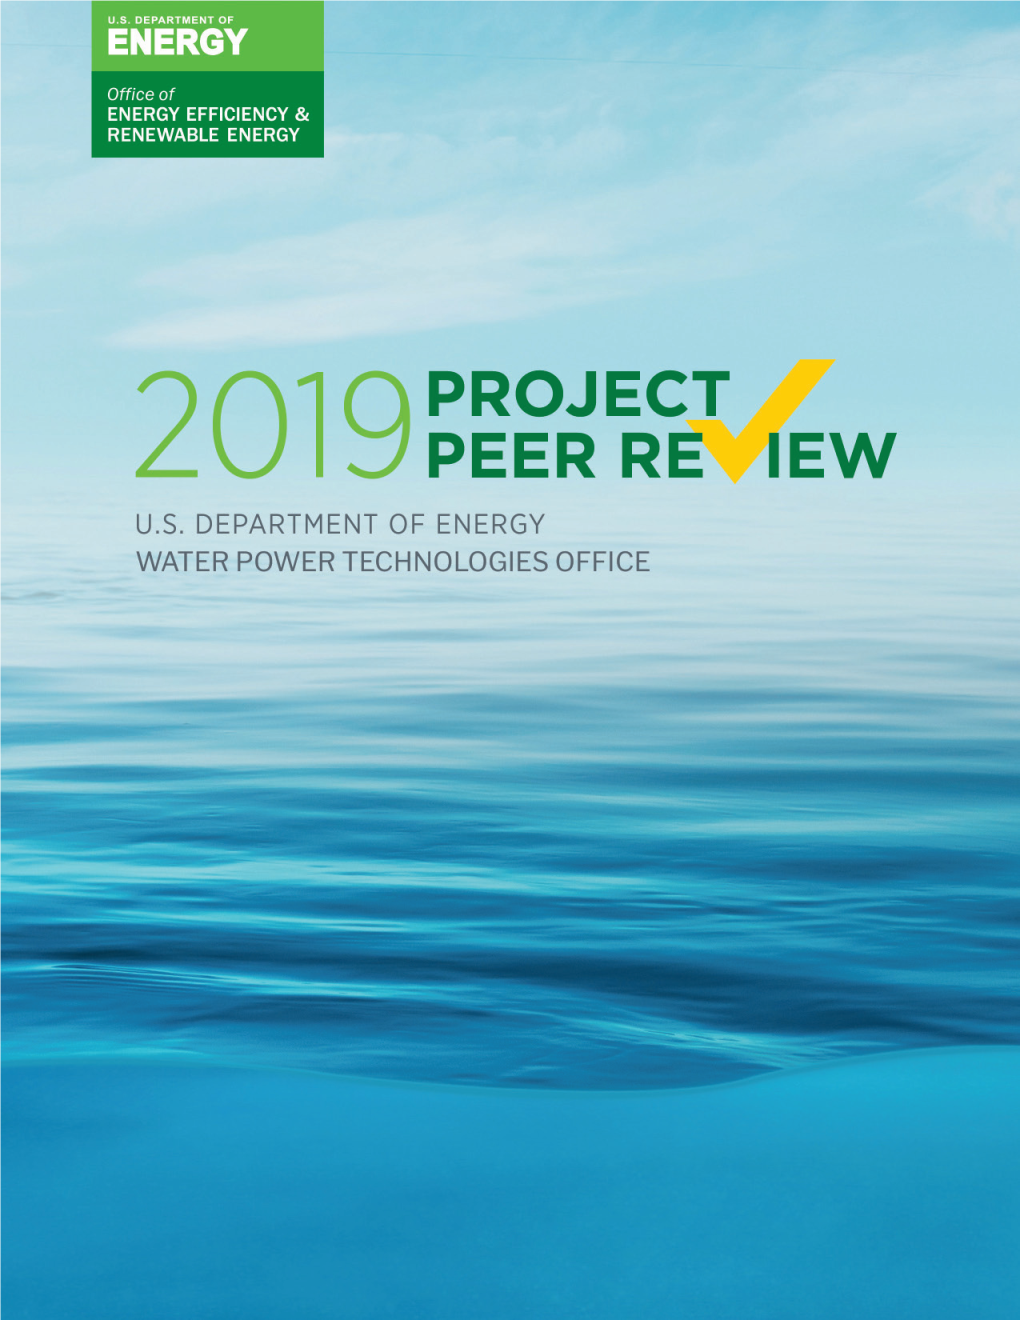 Water Power Technologies Office 2019 Peer Review Final Report